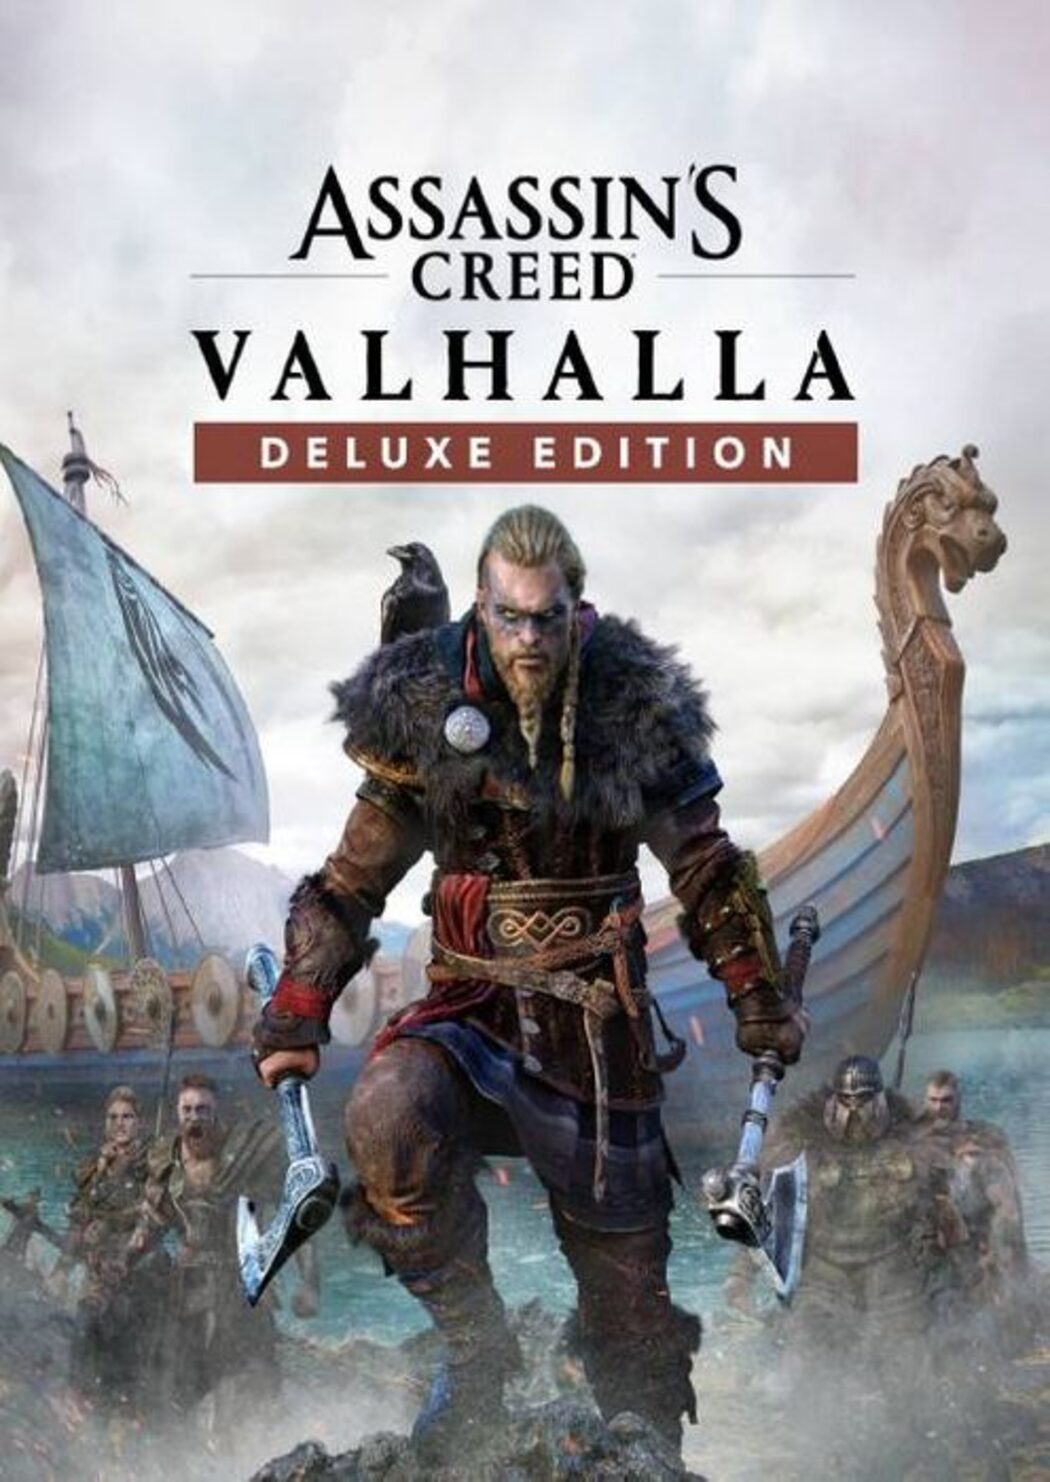 Assassin's Creed Valhalla Deluxe Edition PC Uplay Key